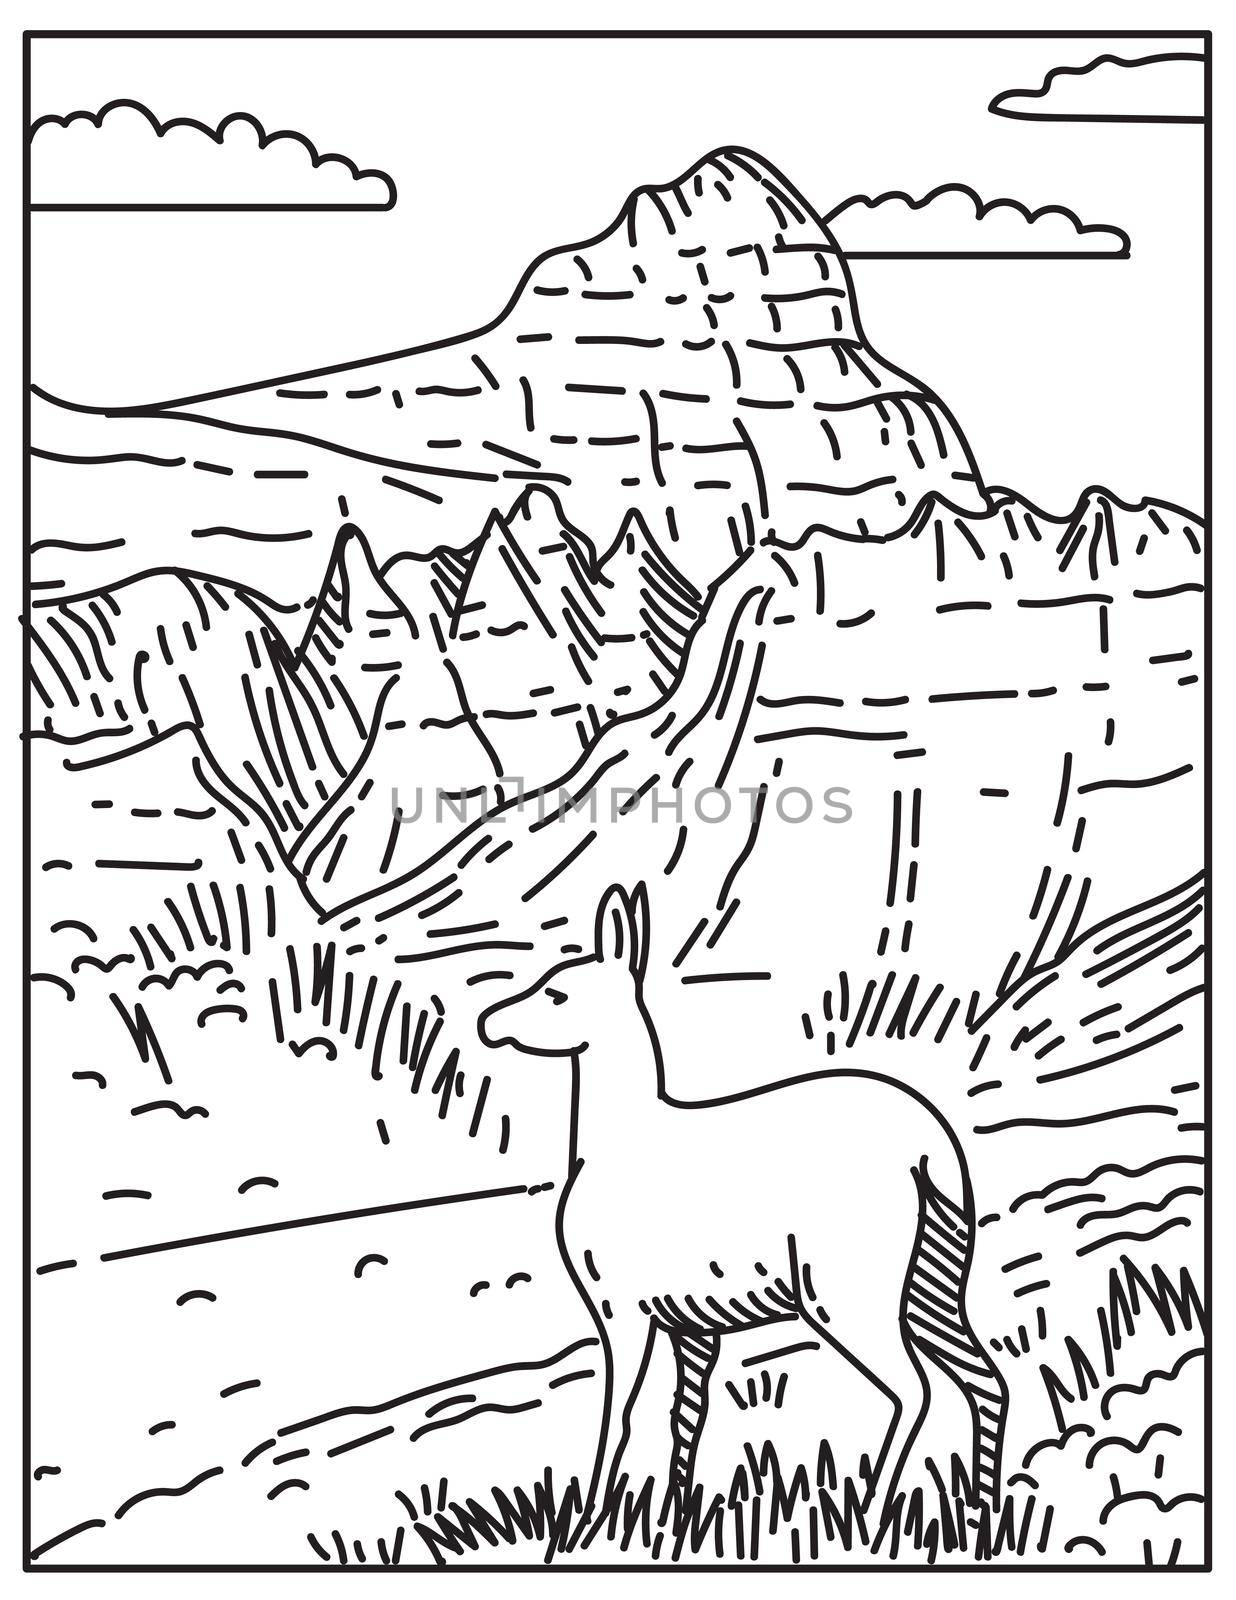 Badlands National Park with Deer and Steep Canyons in South Dakota USA Mono line Poster Art  by patrimonio